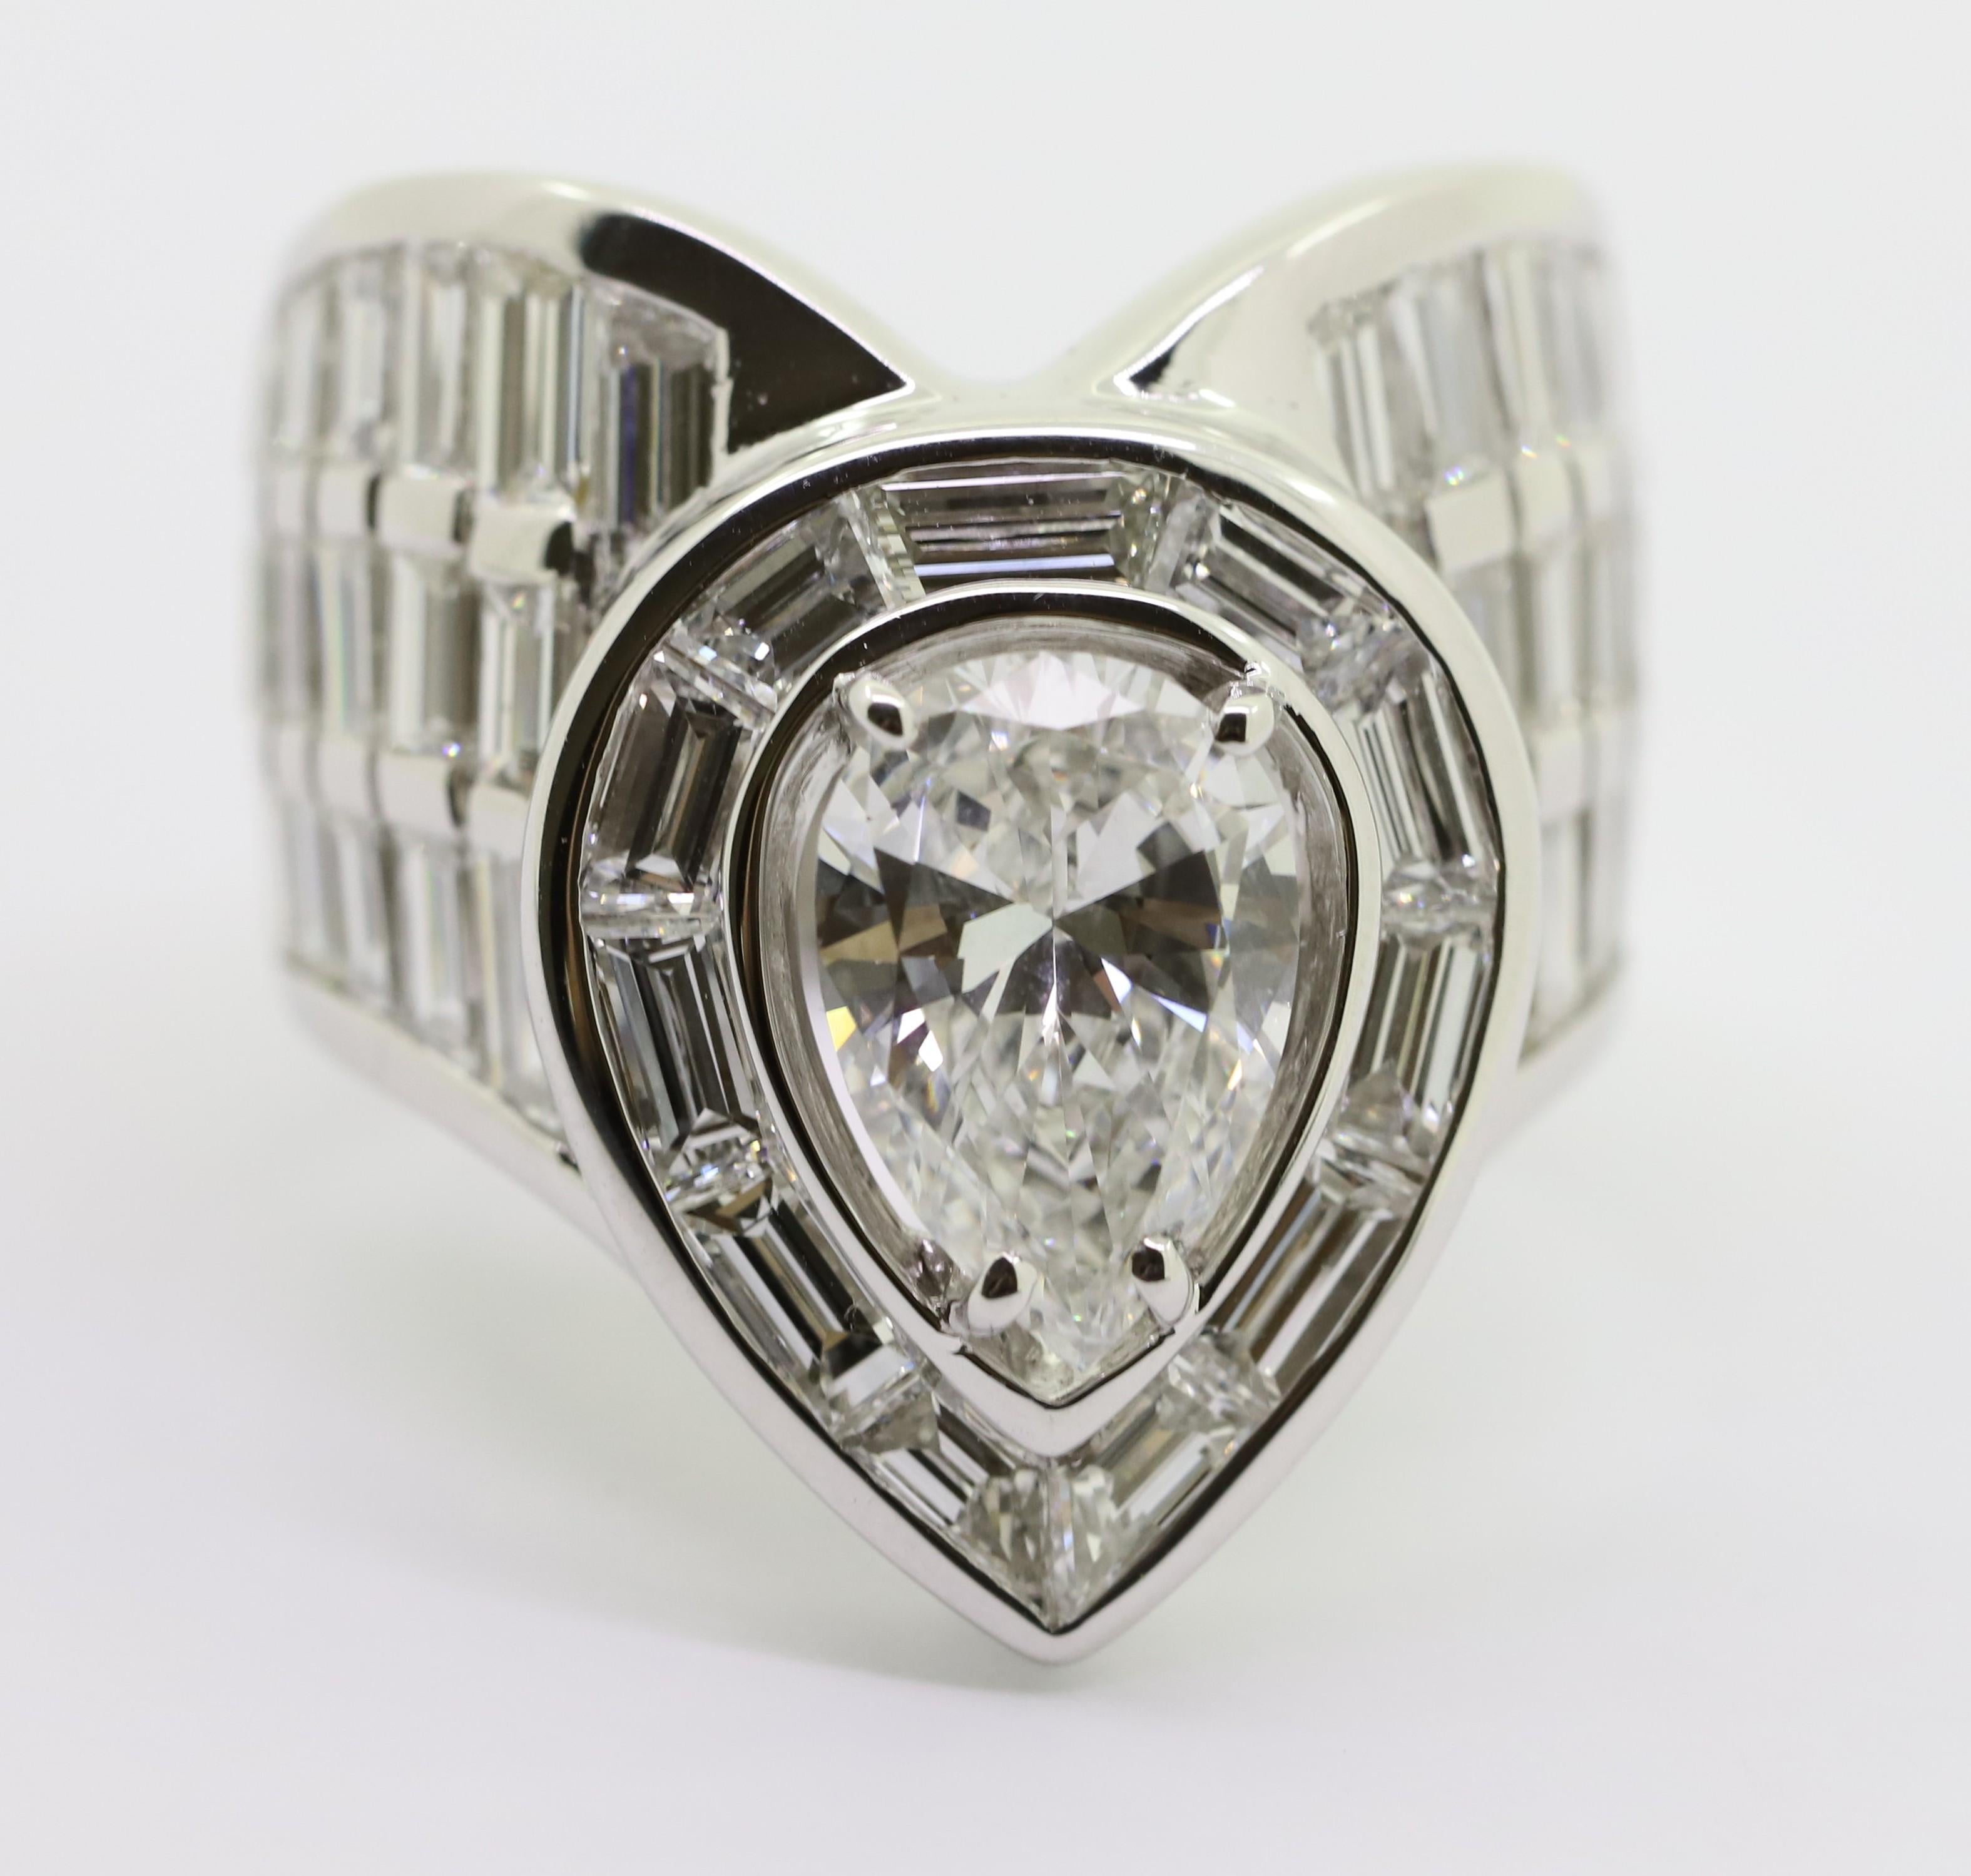 A large 18kt white gold ring with a drop-cut diamond in the center and baguette-cut diamonds.

The object remembers the shape of a heart, when we look at the drop on the reverse side.

Object made in Italy